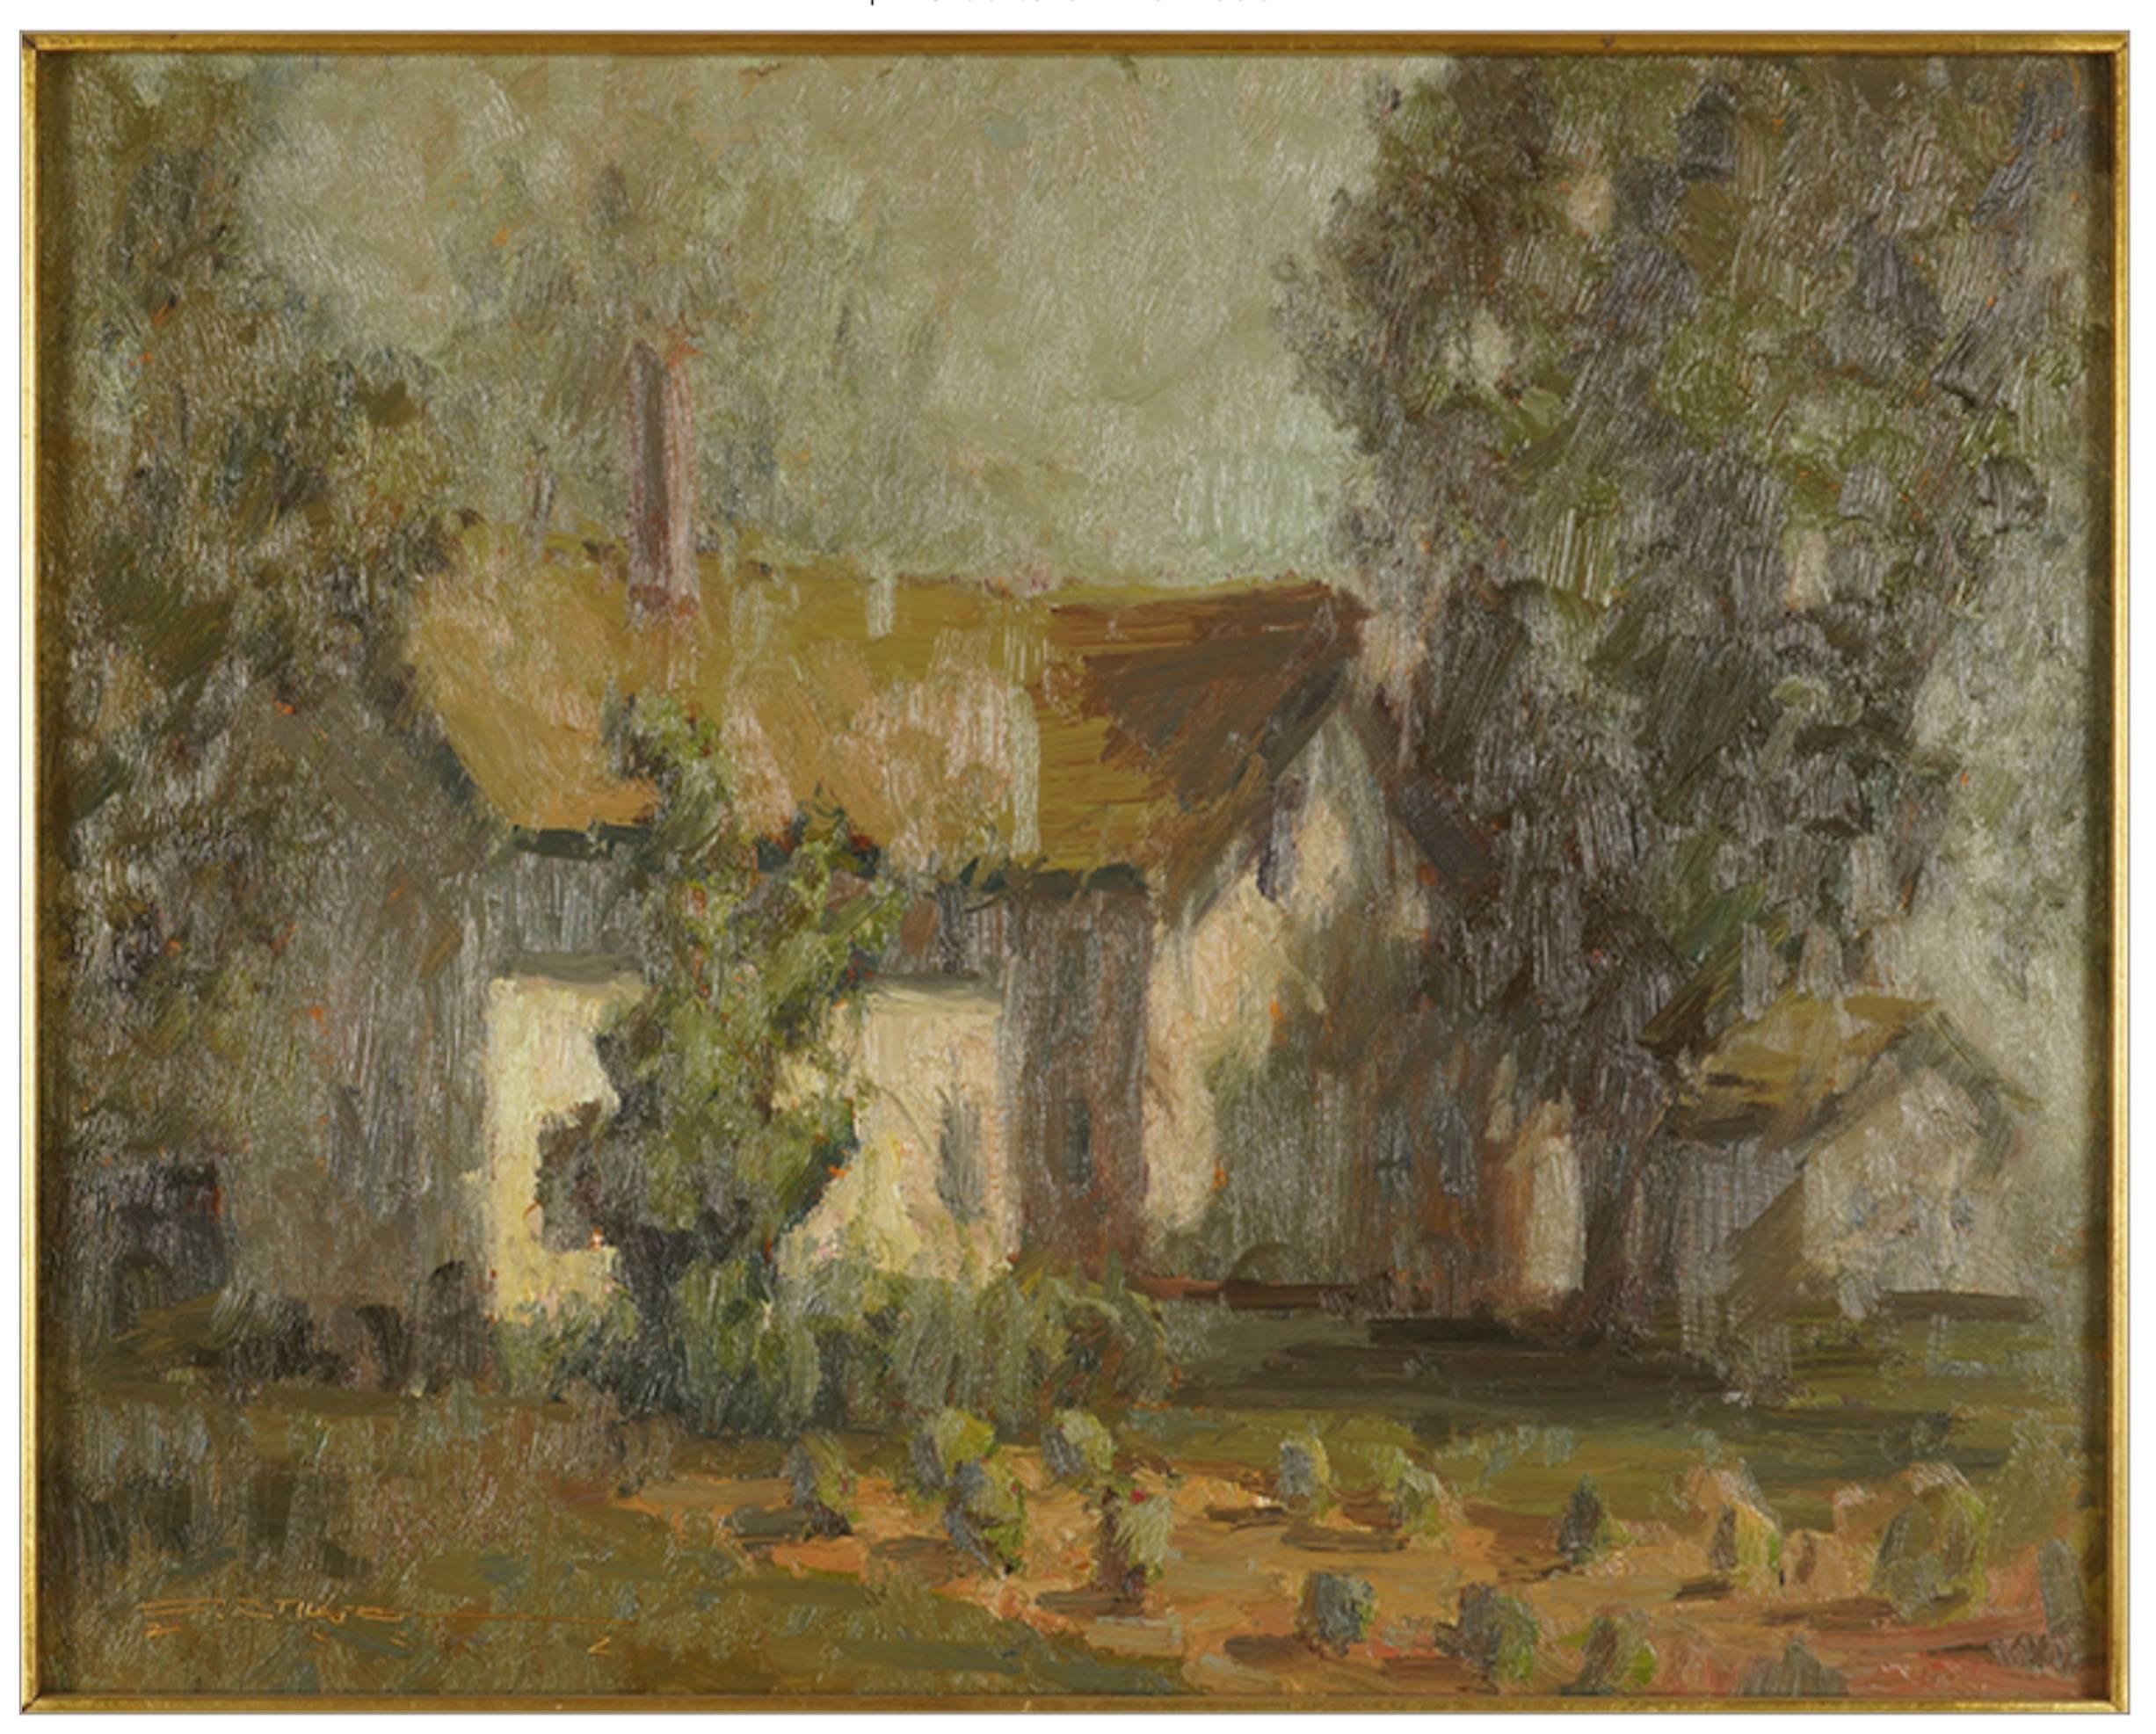 Item 9366-18
C. Stuart (American, 20th Century) house among trees.
Oil on board, signed lower left and dated 2002.
Measures: 16